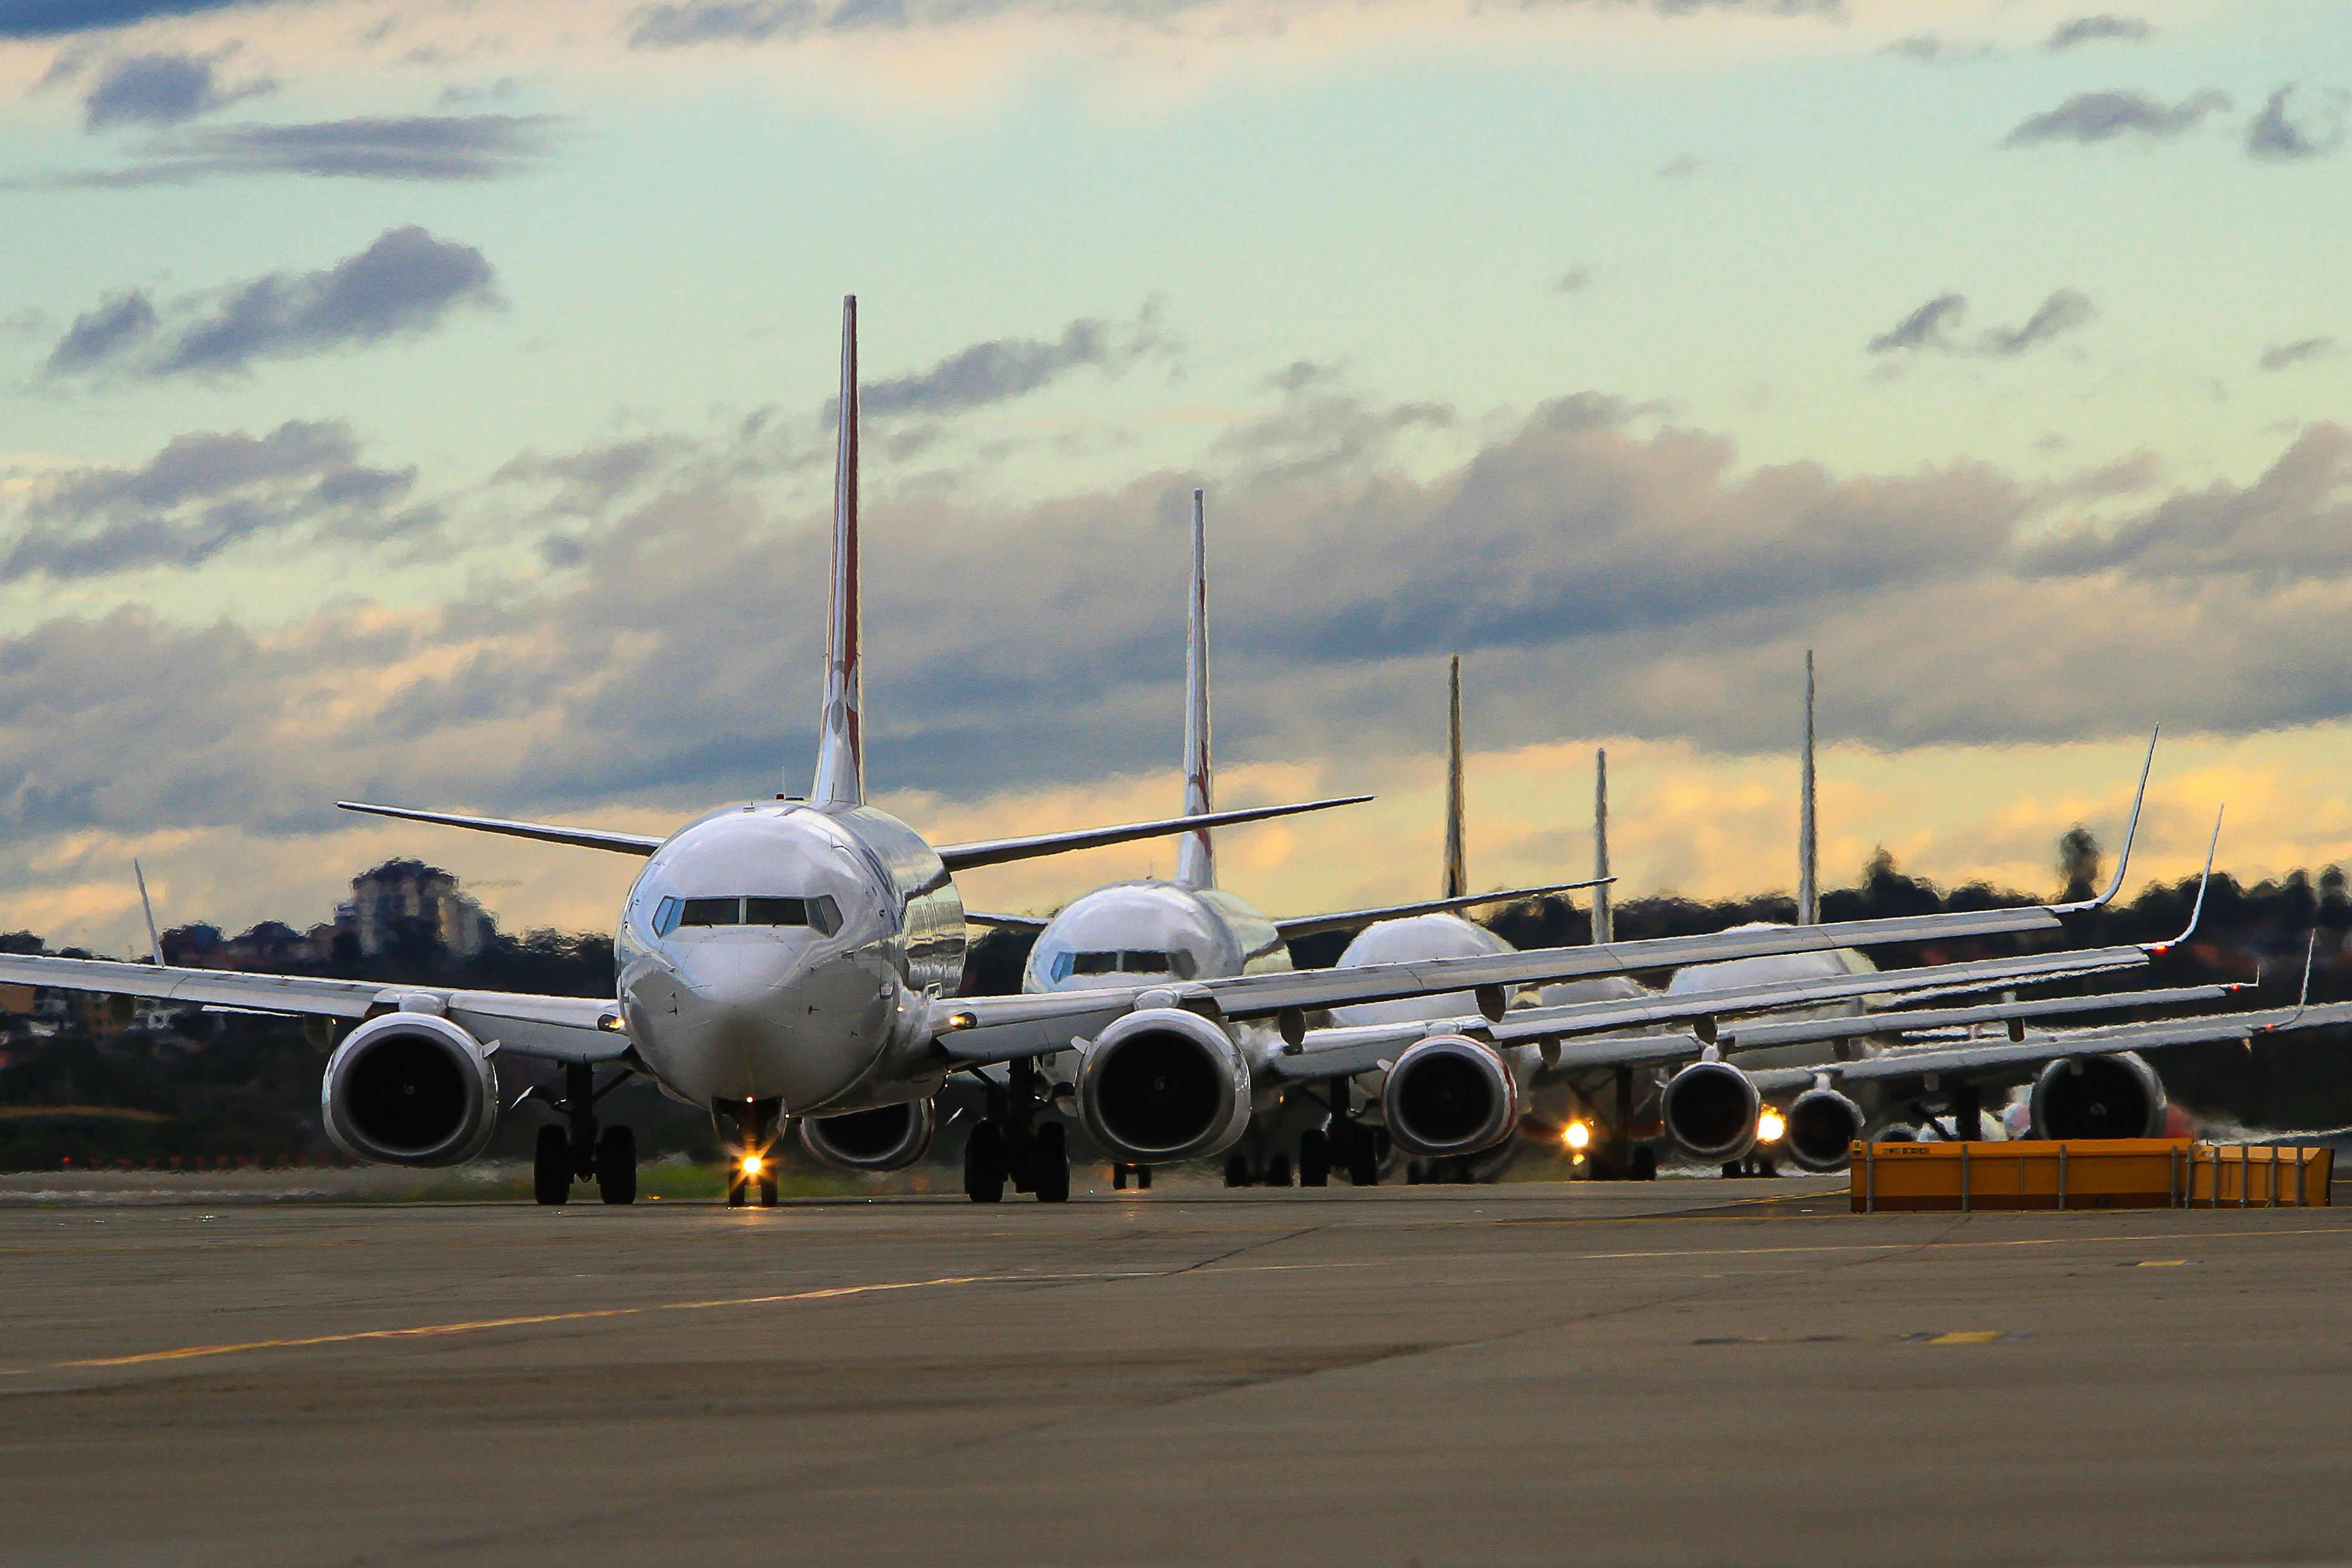 Aircraft lined up at the airport Shutterstock